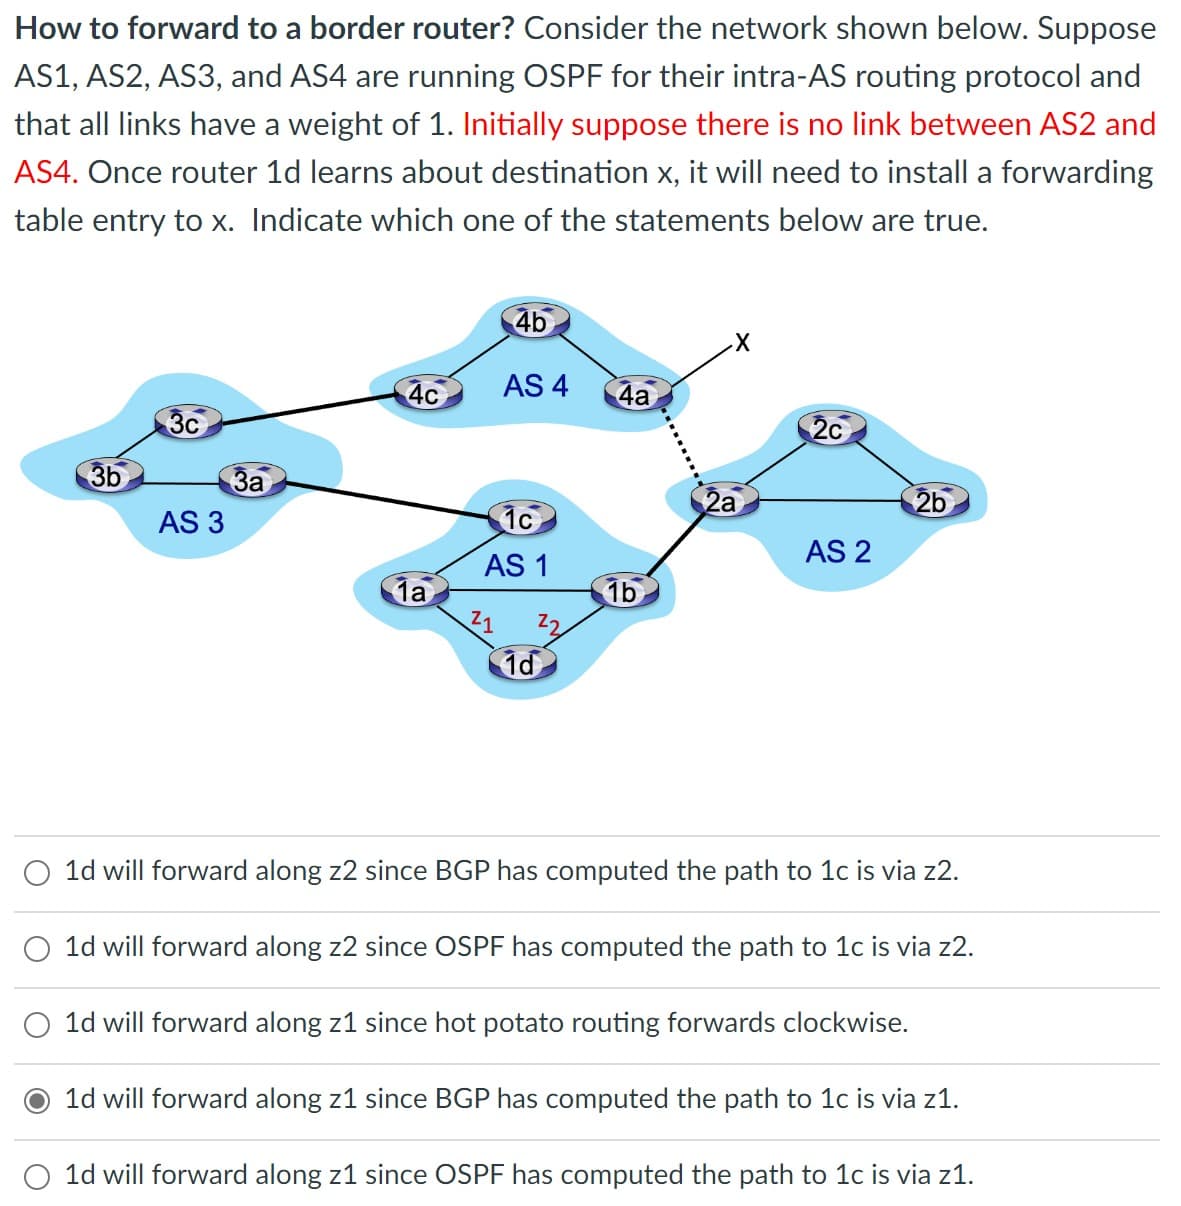 How to forward to a border router? Consider the network shown below. Suppose
AS1, AS2, AS3, and AS4 are running OSPF for their intra-AS routing protocol and
that all links have a weight of 1. Initially suppose there is no link between AS2 and
AS4. Once router 1d learns about destination x, it will need to install a forwarding
table entry to x. Indicate which one of the statements below are true.
3b
3c
AS 3
3a
4c
1a
4b
21
AS 4
1c
AS 1
1d
22
4a
1b
X
2a
2c
AS 2
2b
1d will forward along z2 since BGP has computed the path to 1c is via z2.
1d will forward along z2 since OSPF has computed the path to 1c is via z2.
1d will forward along z1 since hot potato routing forwards clockwise.
1d will forward along z1 since BGP has computed the path to 1c is via z1.
1d will forward along z1 since OSPF has computed the path to 1c is via z1.